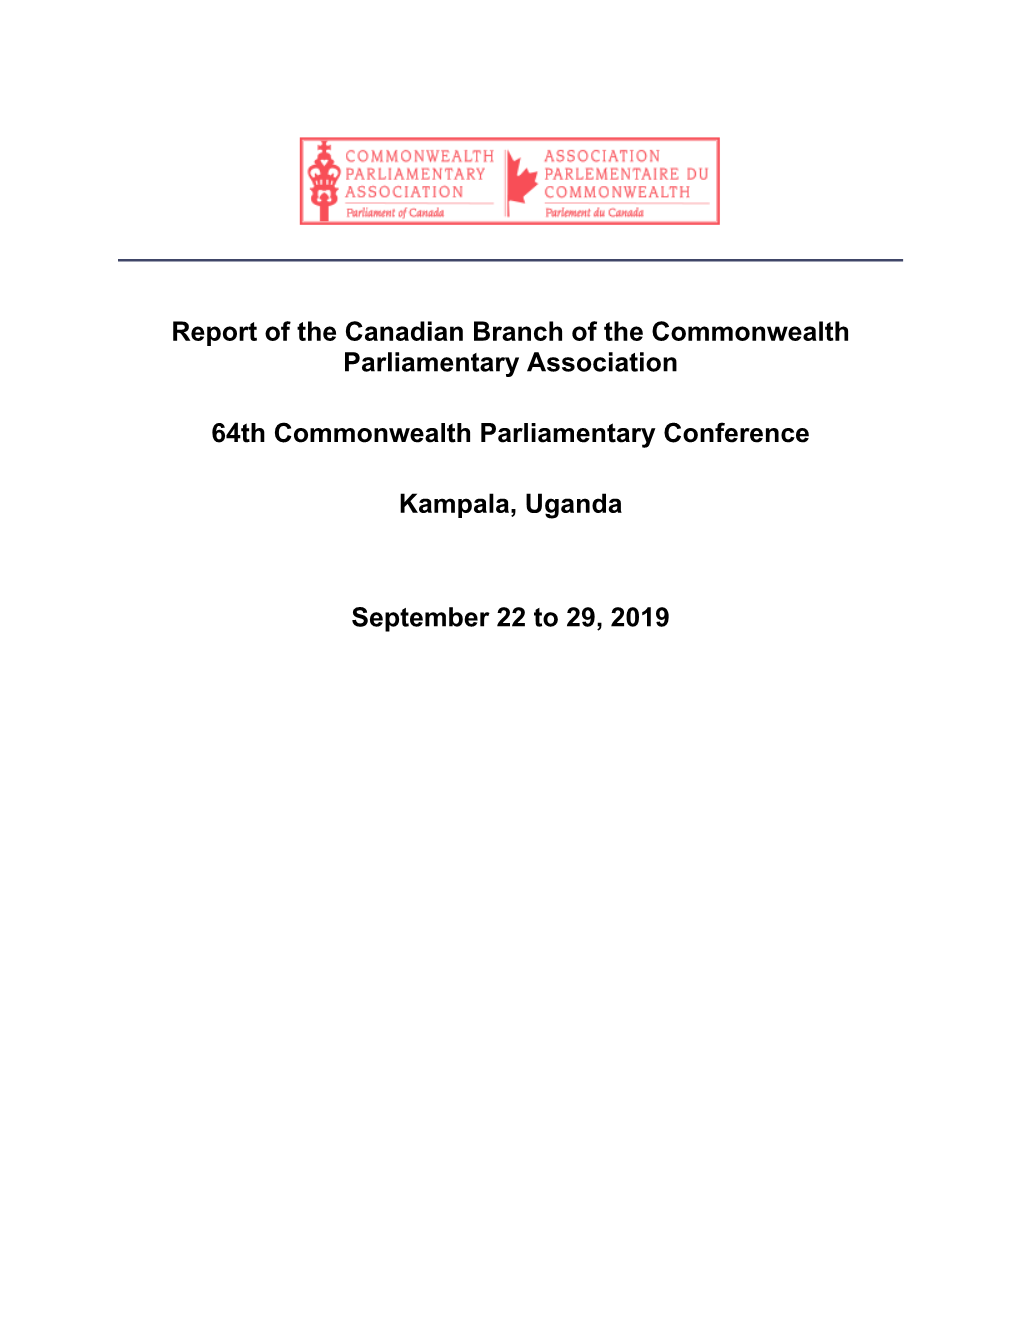 Canadian Branch of the Commonwealth Parliamentary Association